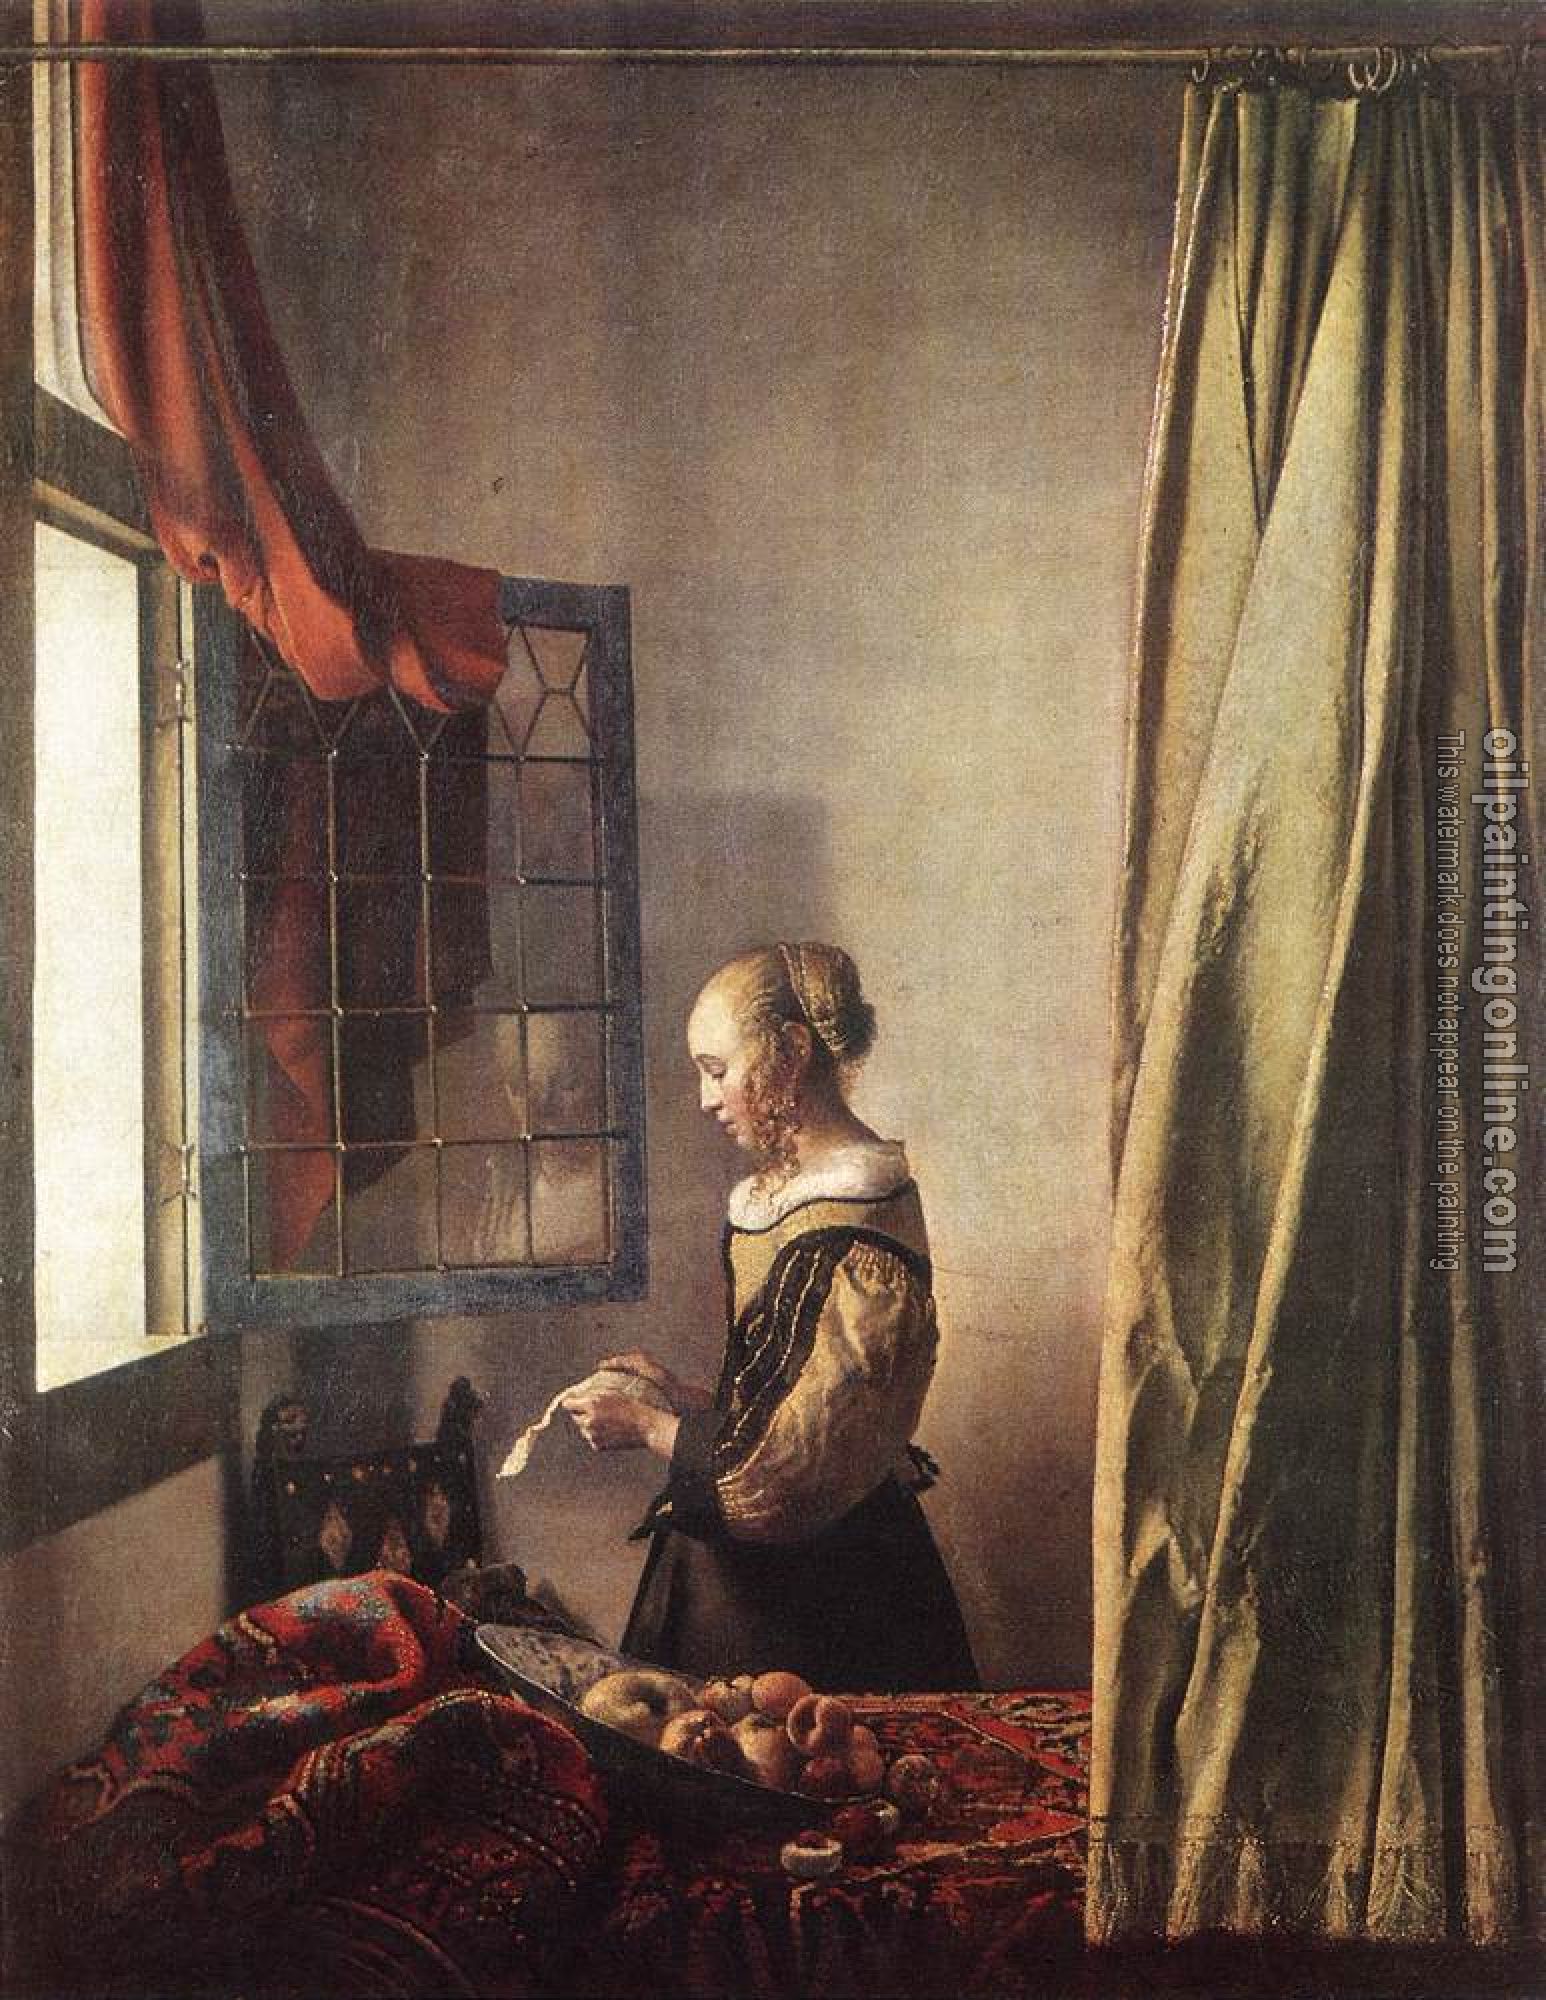 Vermeer, Jan - Girl Reading a Letter at an Open Window